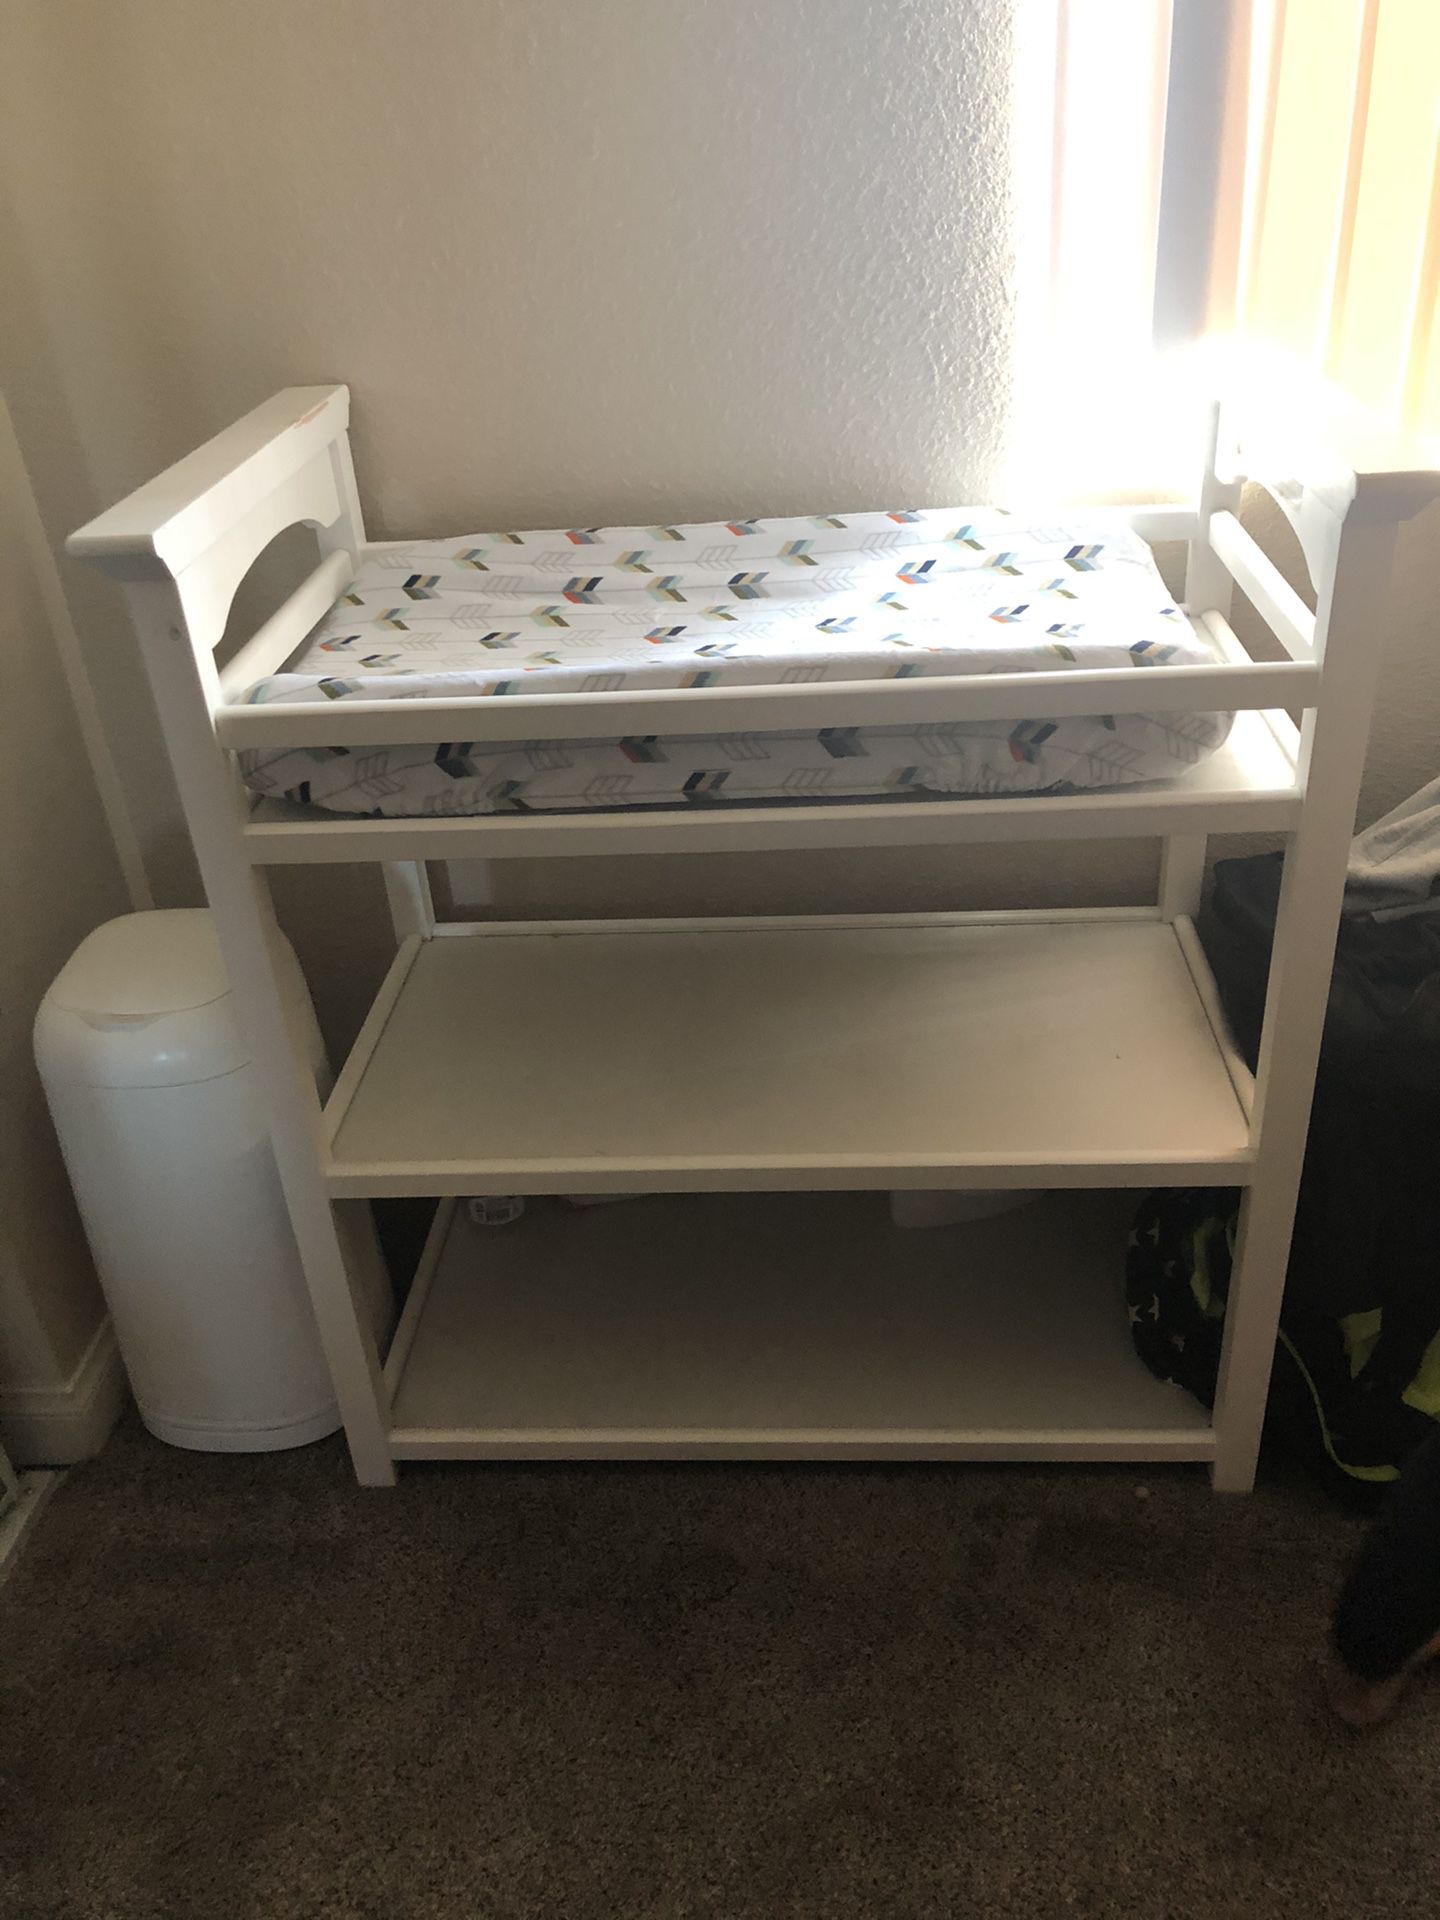 Baby Changing Table & Diaper Genie